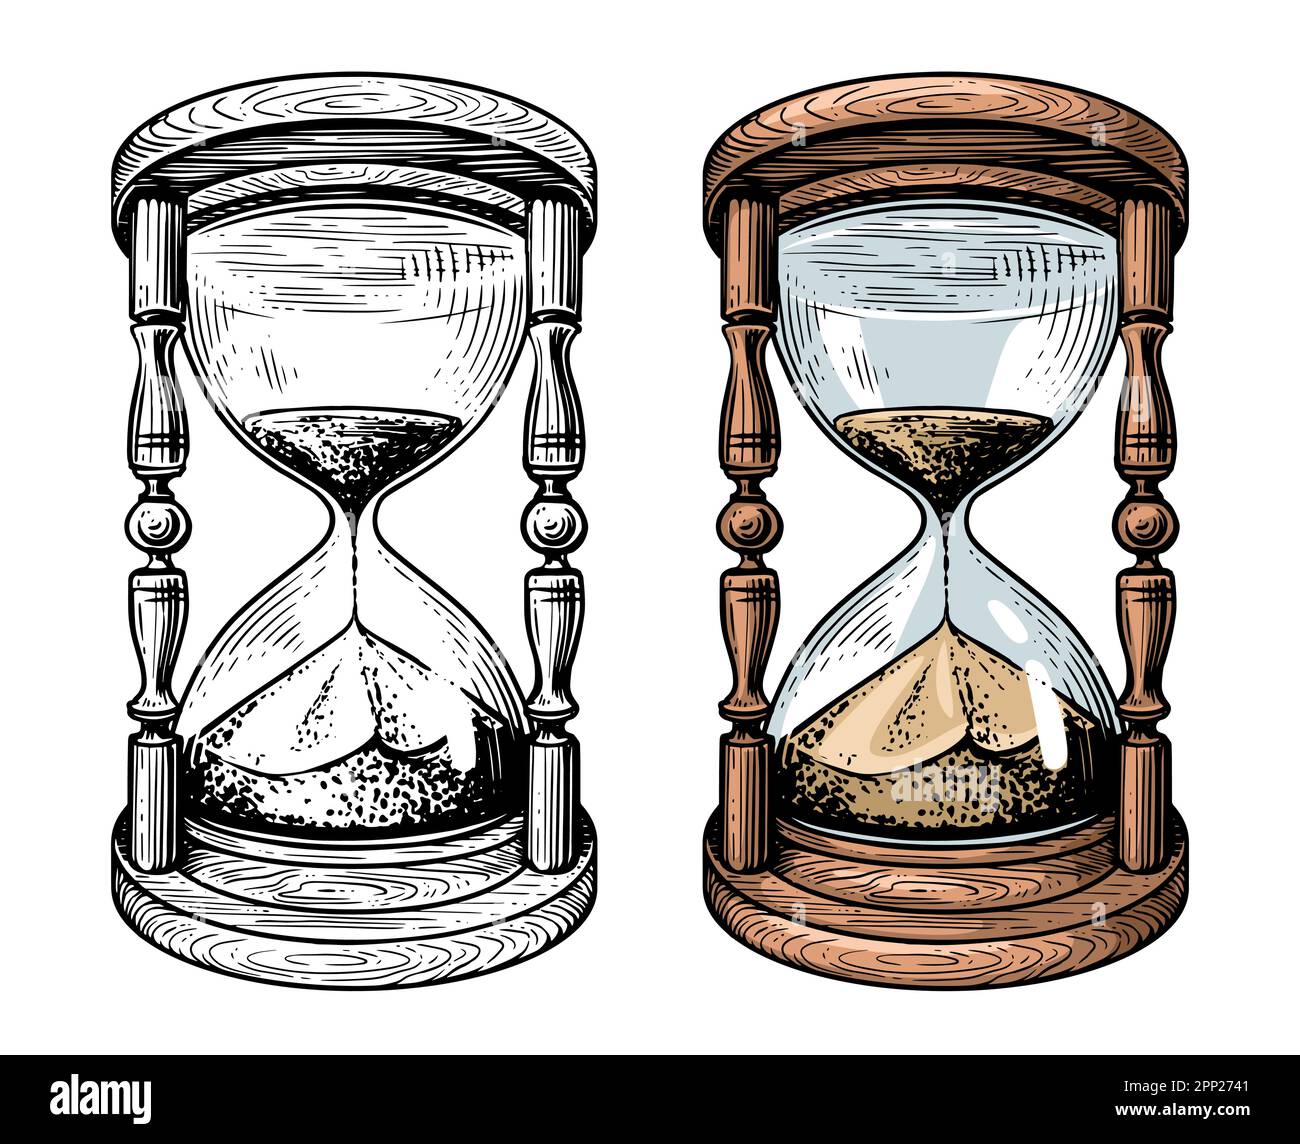 Fragile Time - Hourglass - Posters and Art Prints | TeePublic